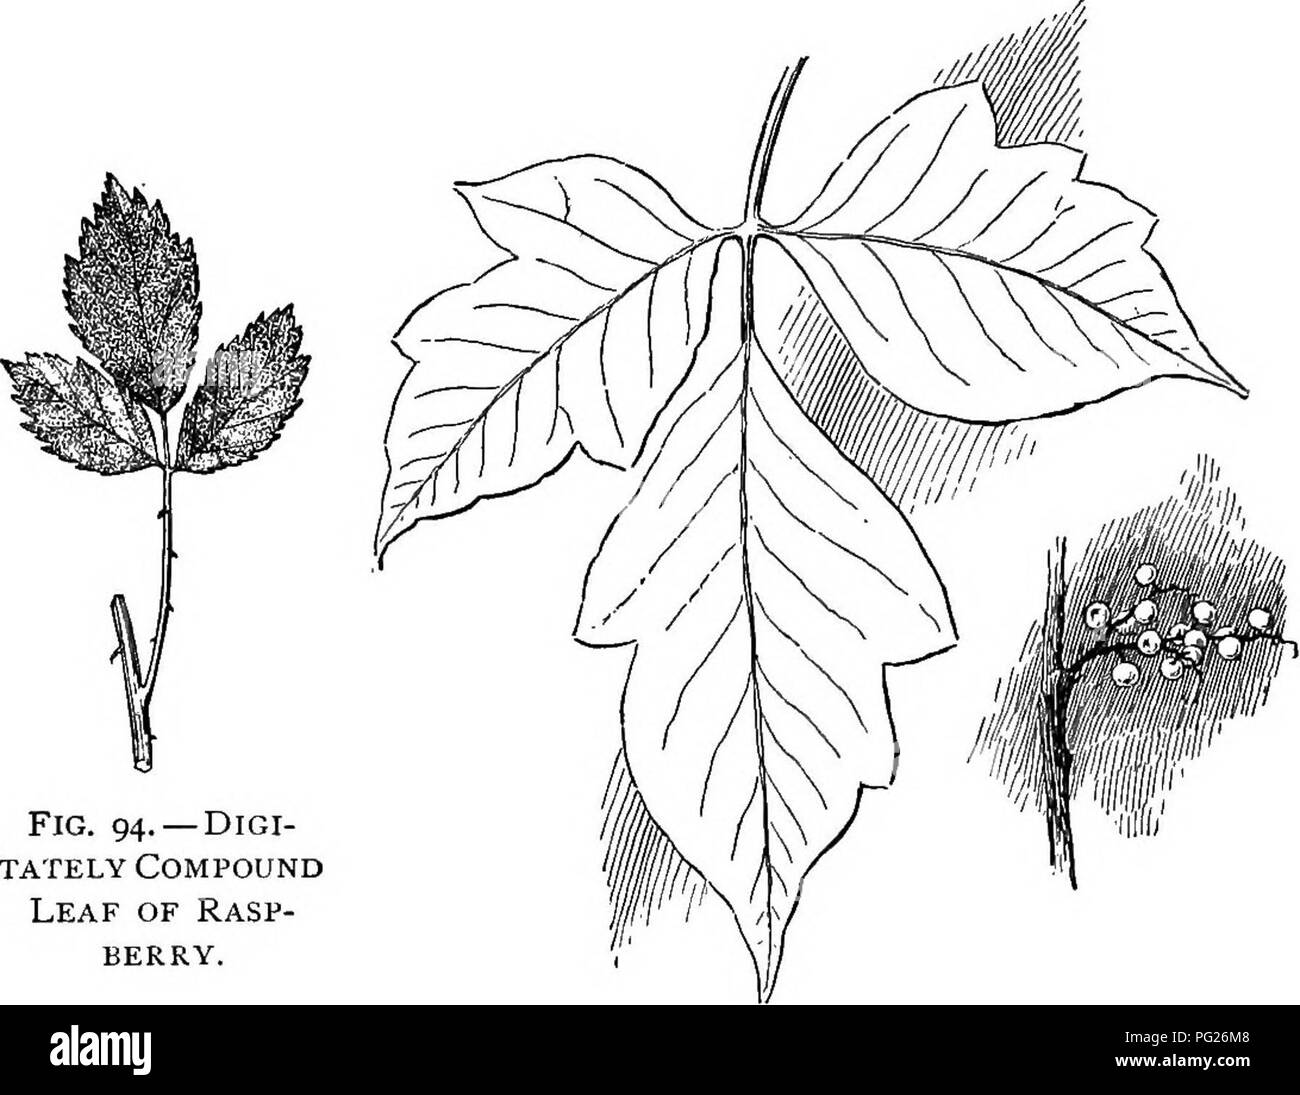 . Beginners' botany. Botany. LEAVES—FORM AND POSITION 75 Sometimes the leaflets themselves are compound, and the whole leaf is then said to be bi-compound or twice-com-. FlG. 94. — DlGI- TATELY Compound Leaf of Rasp- berry. Fig. 95.— Poison Ivy. Leaf and Fruit. pound (Fig. 90). Some leaves are three-compound, four- compound, or five-compound. Decompound is a general term to express any degree of compounding beyond twice-com- pound. Leaves that are not divided as far as to the midrib are said to be: lobed, if the openings or sinuses are not more than half the depth of the blade (Fig. 96); cleft Stock Photo